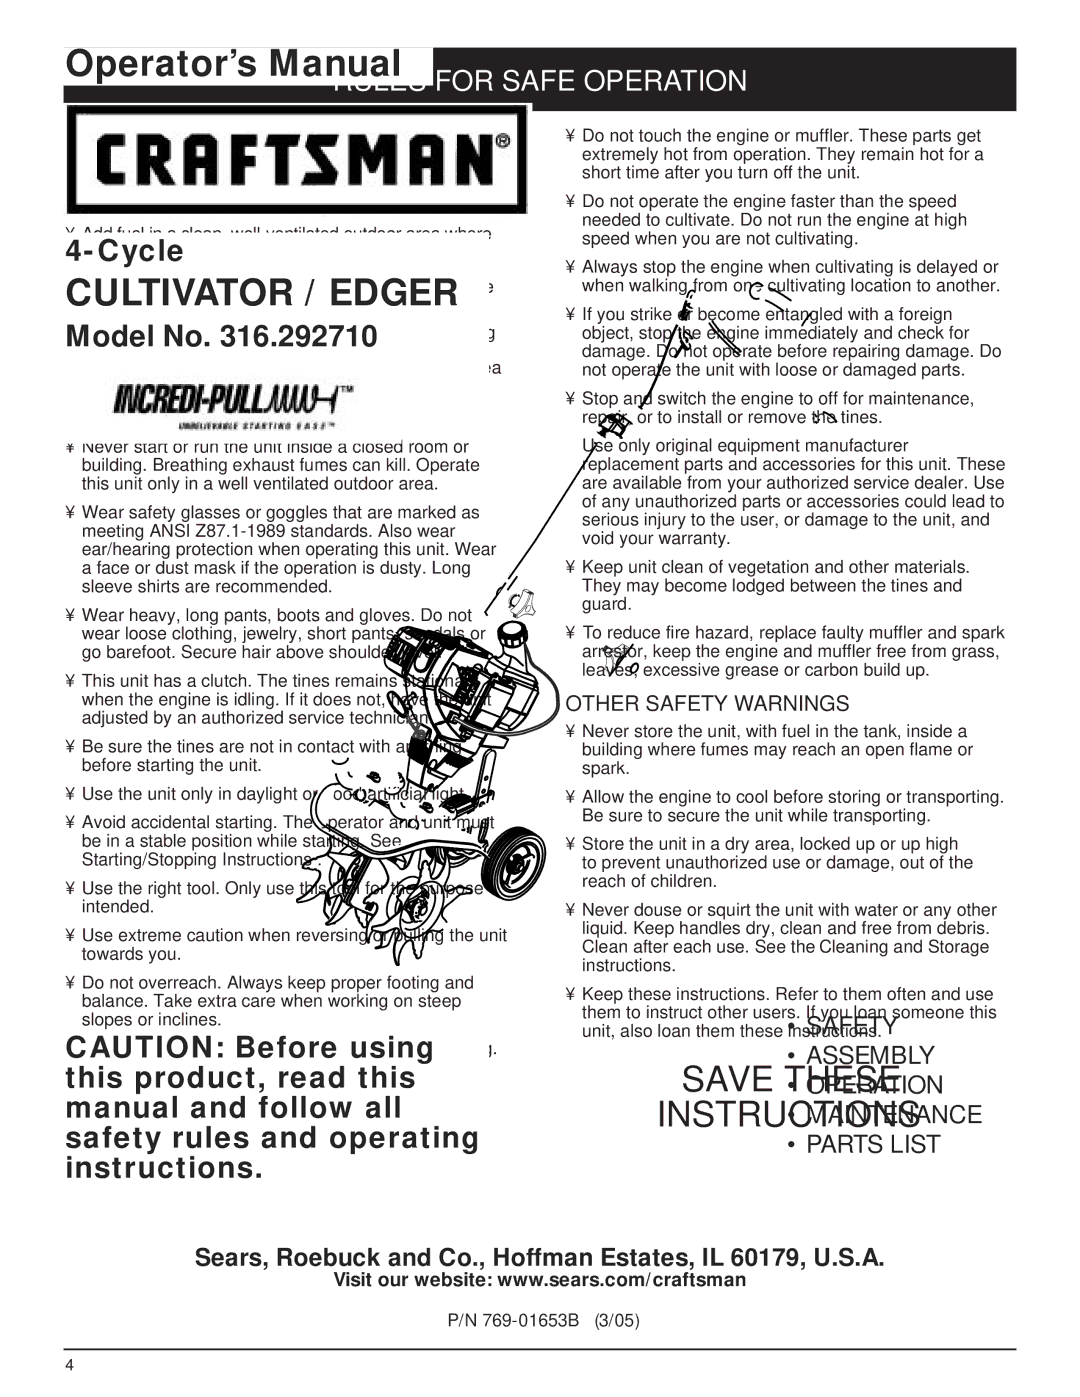 Craftsman 316.29271 manual Save These Instructions, While Operating, Other Safety Warnings 